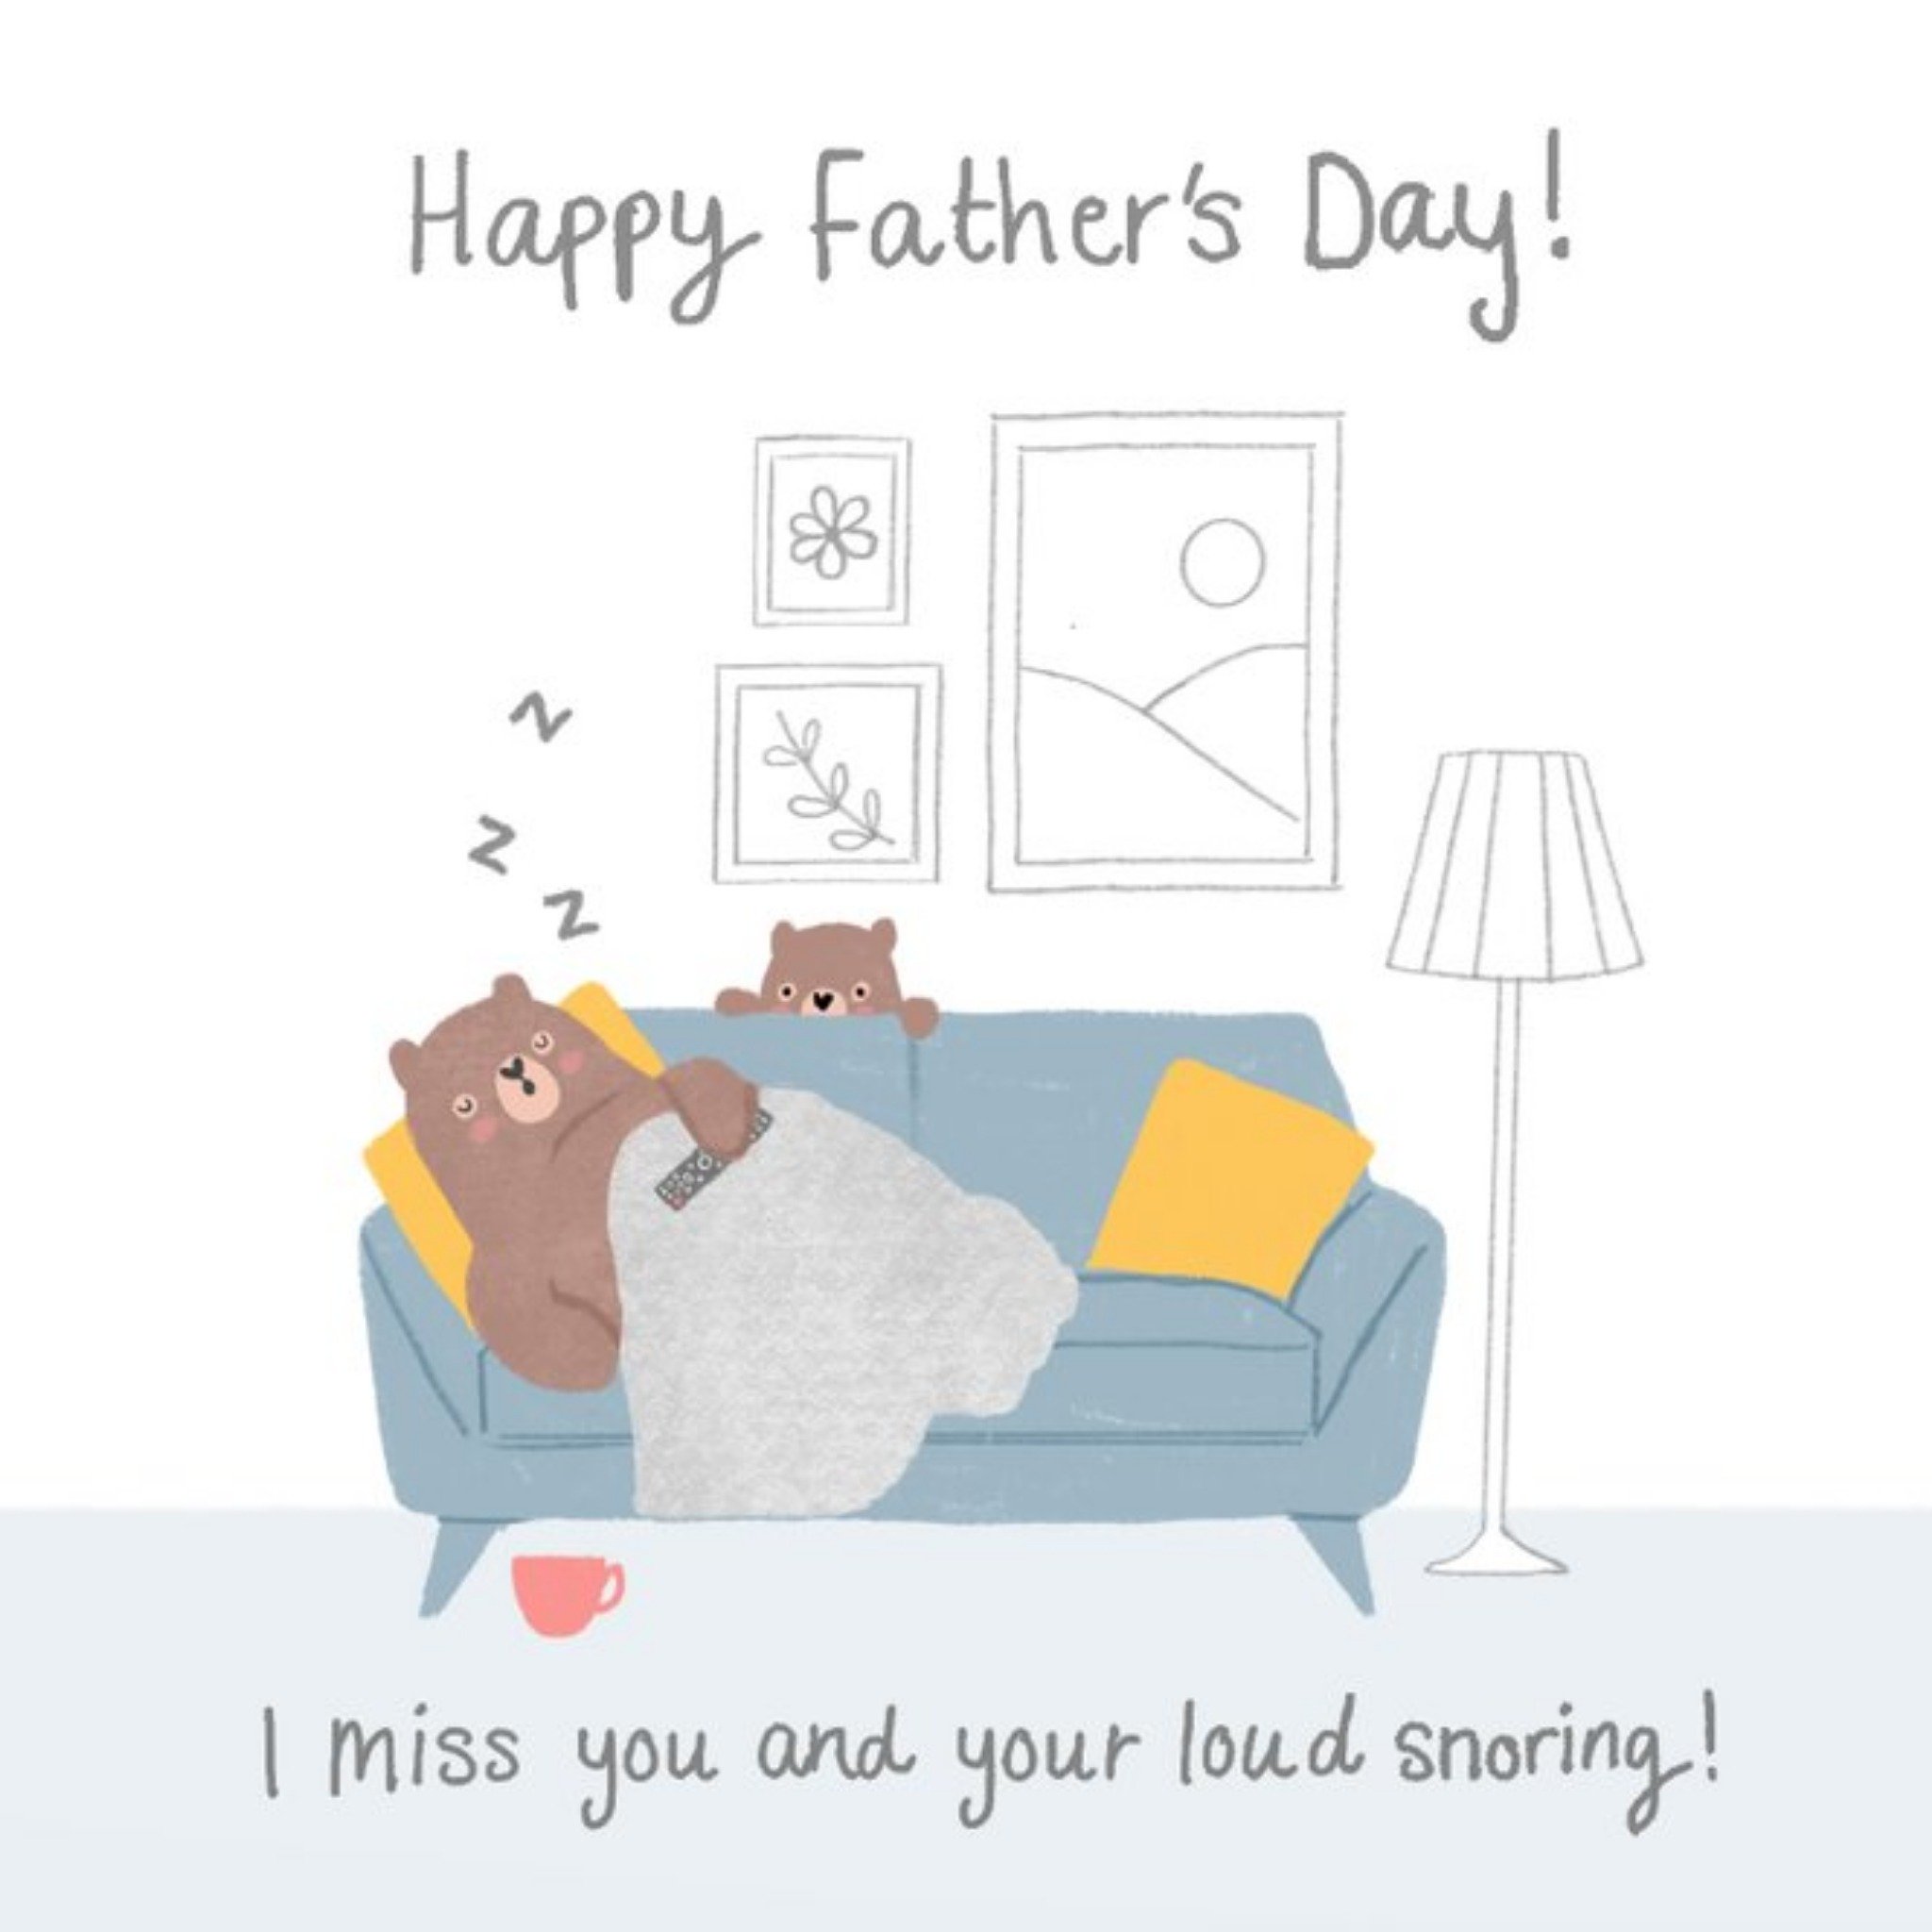 Moonpig Sleeping Bear Happy Father's Day I Miss You And Your Loud Snoring Card, Large